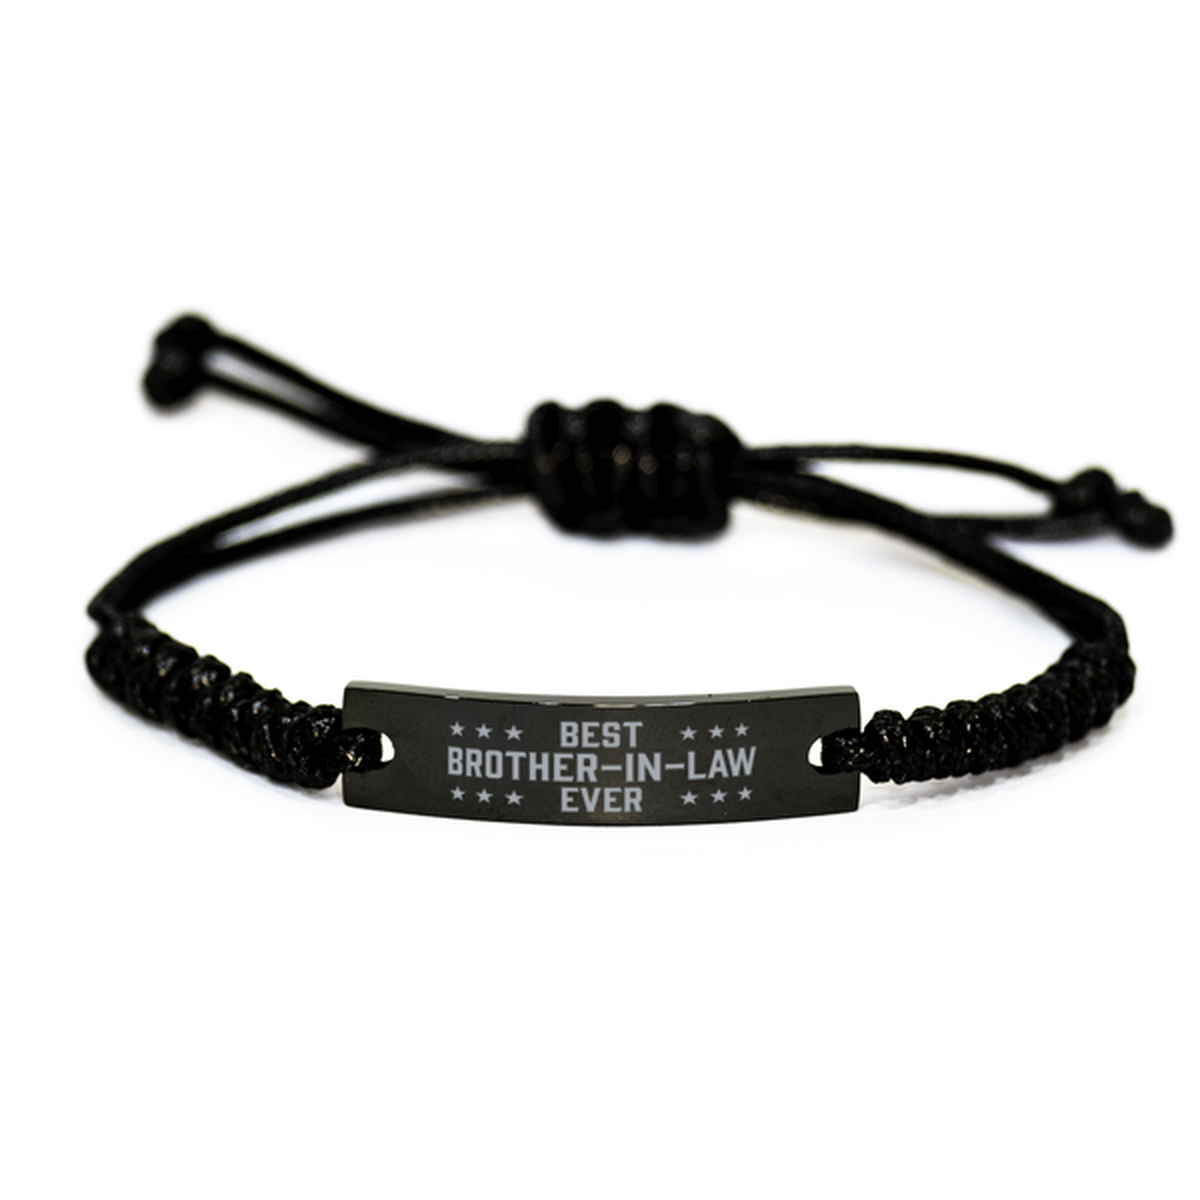 Best Brother-in-law Ever Brother-in-law Gifts, Funny Engraved Rope Bracelet For Brother-in-law, Birthday Family Gifts For Men